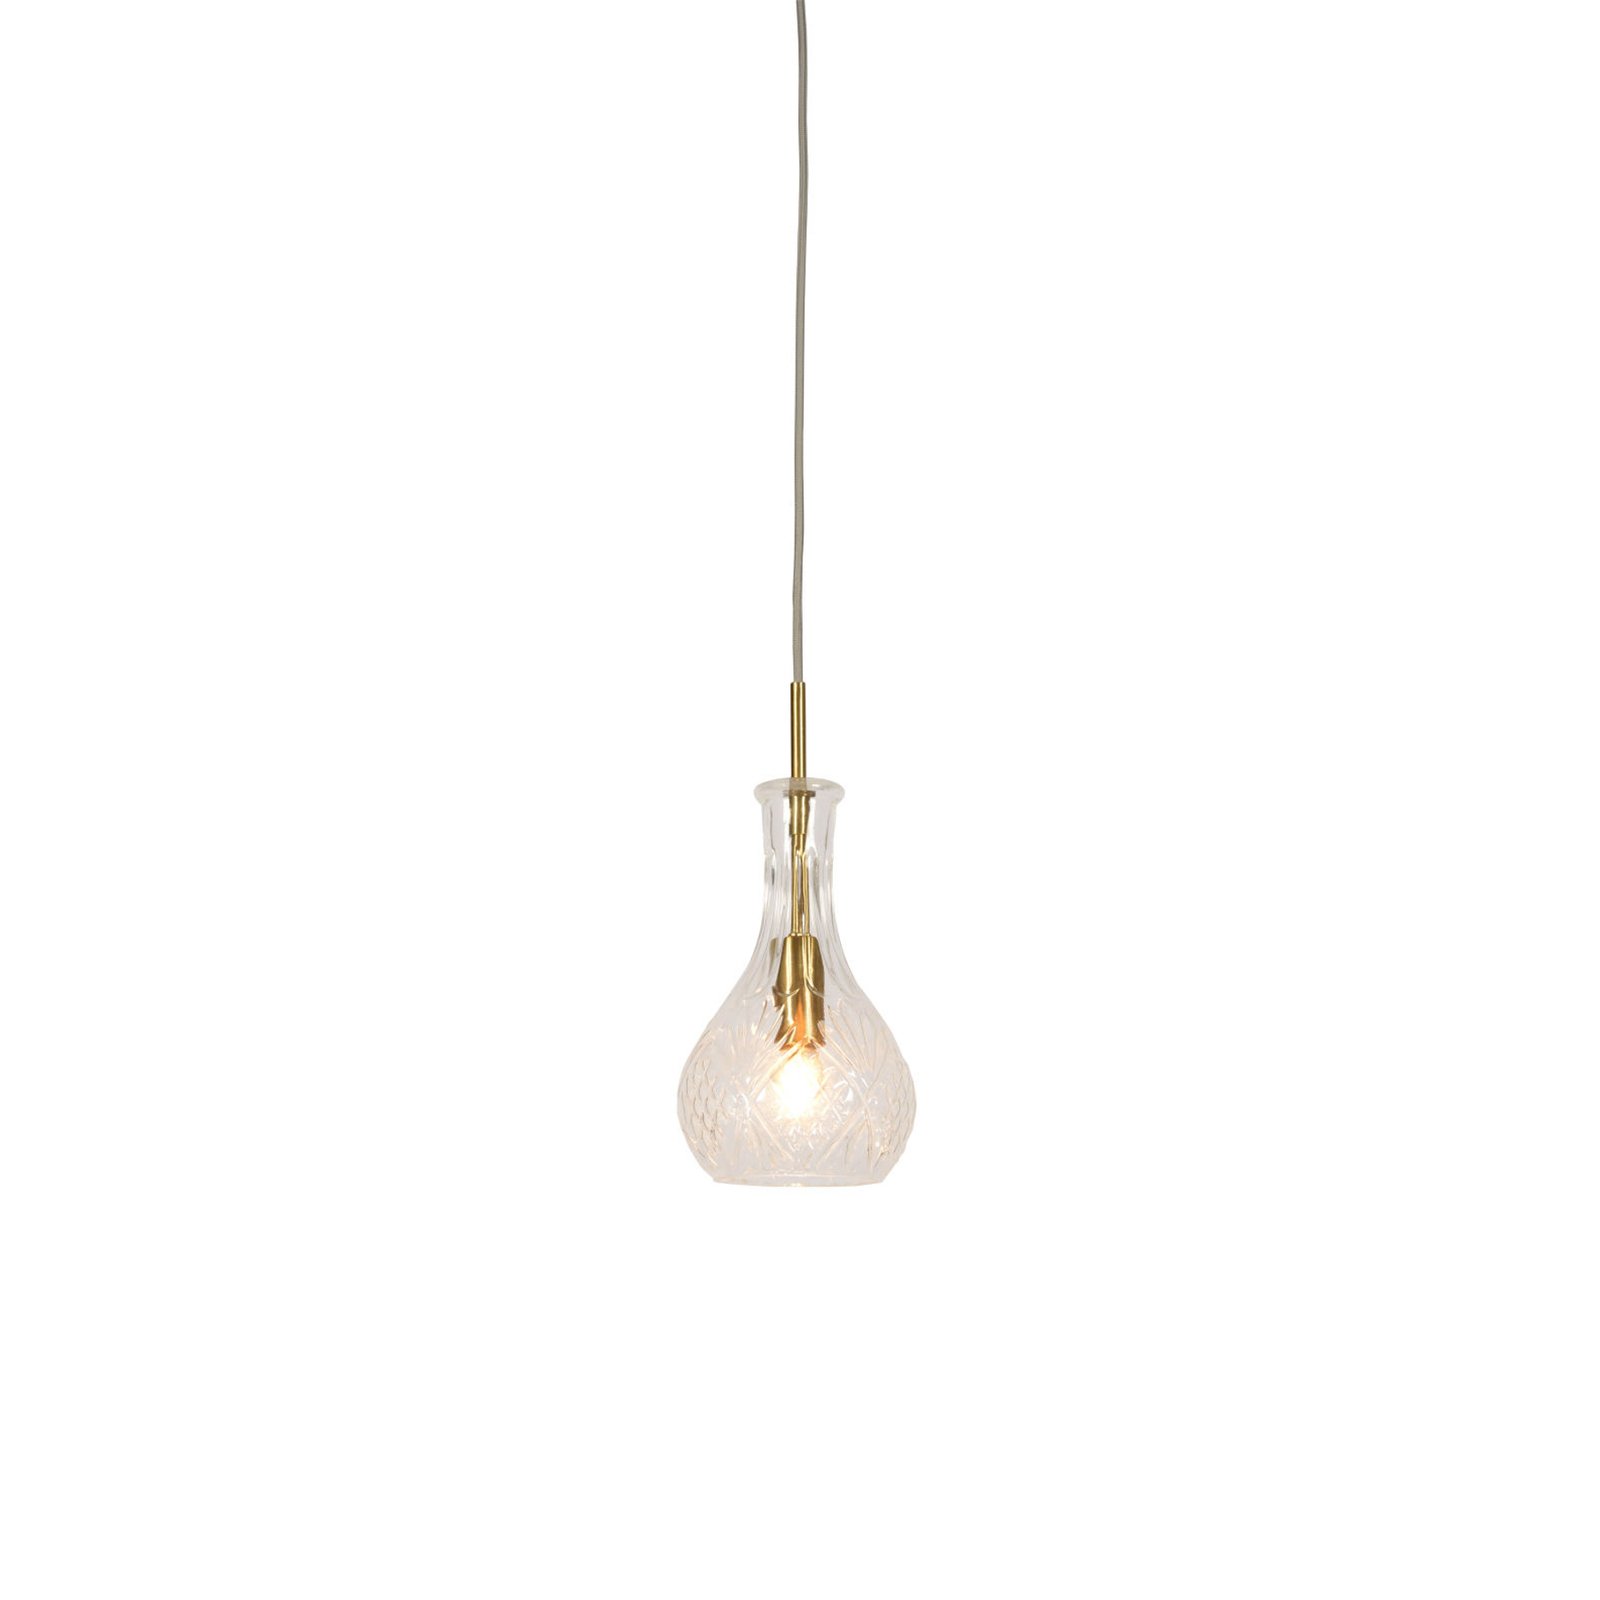 It’s about RoMi Brussels HD hanging light, rounded